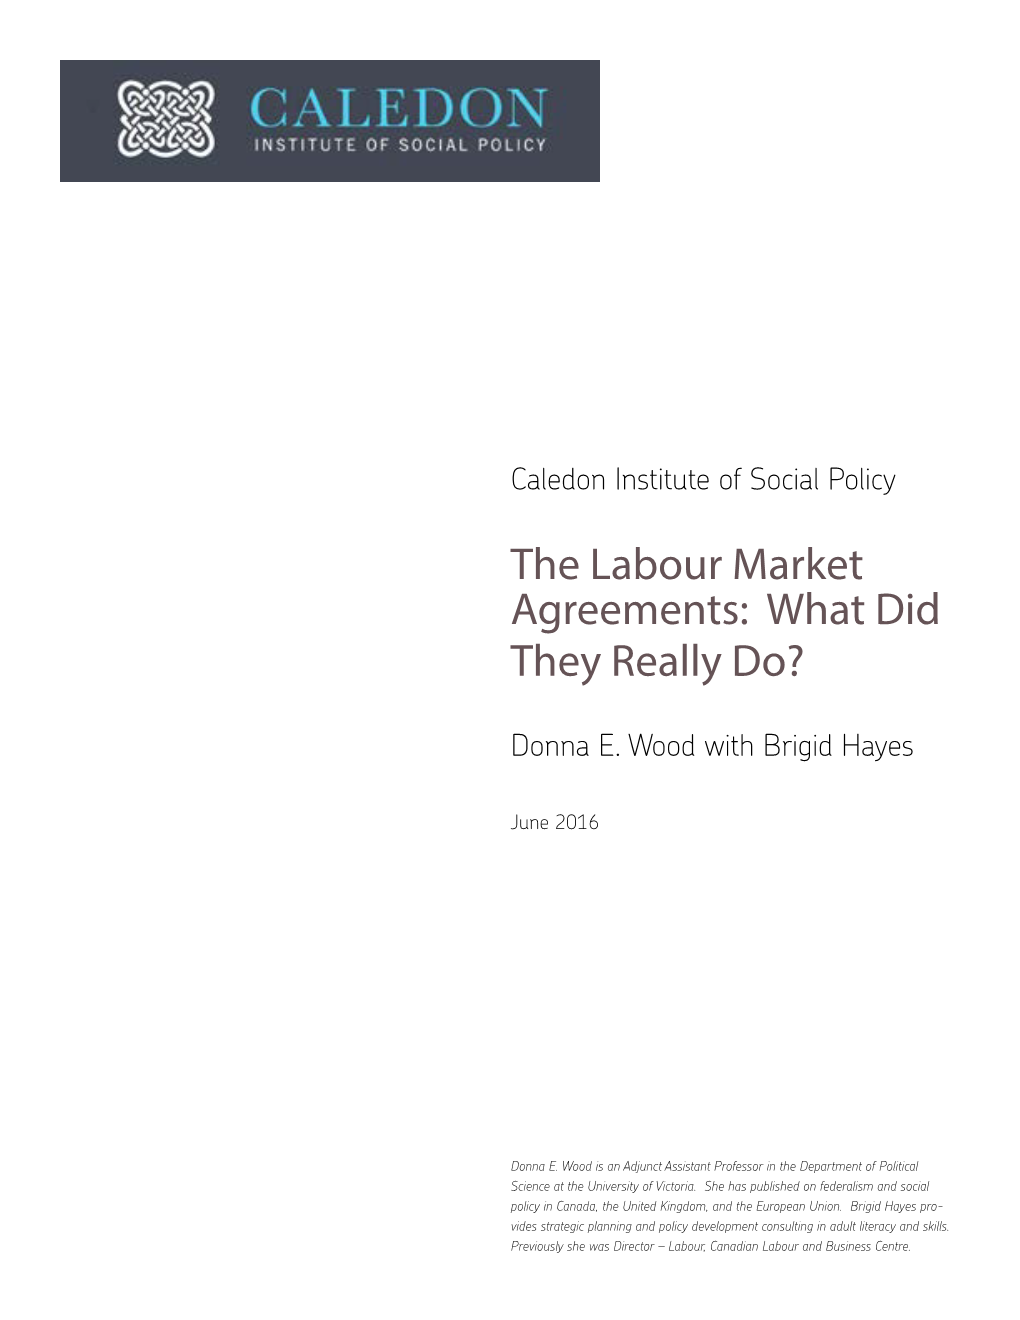 The Labour Market Agreements: What Did They Really Do?